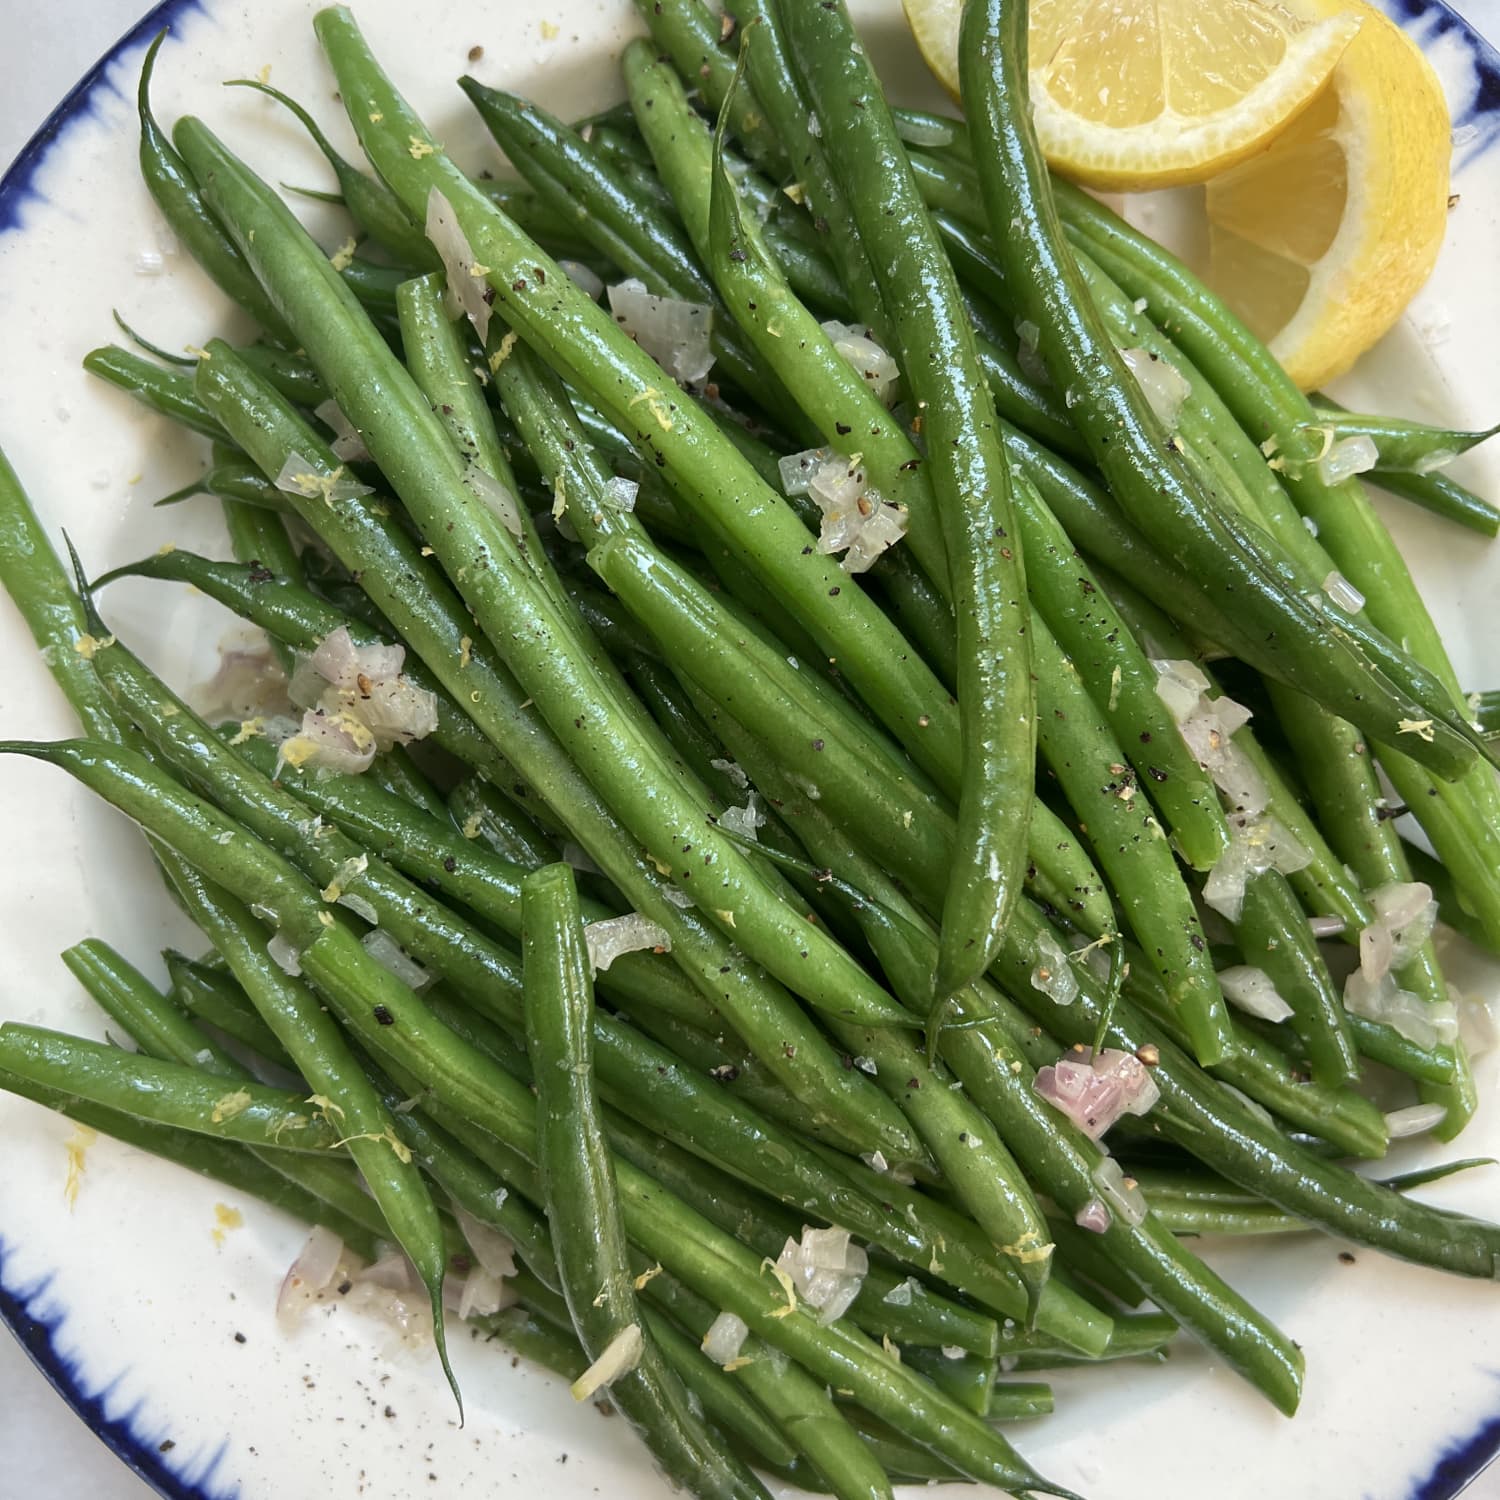 Haricot Verts Recipe (French Green Beans)